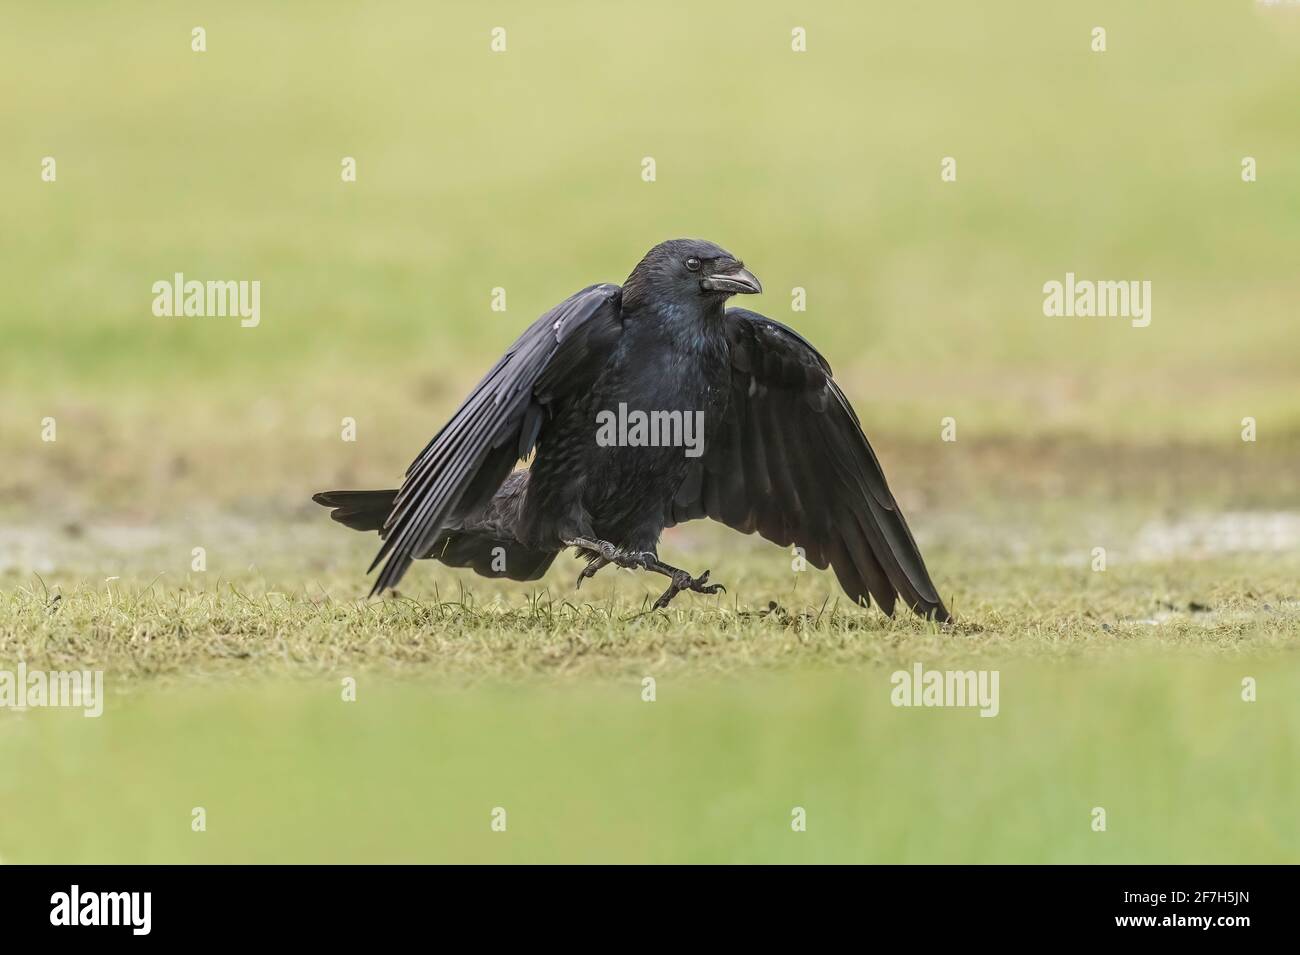 Crow, close up, hopping across frozen ground in Scotland in the winter time Stock Photo